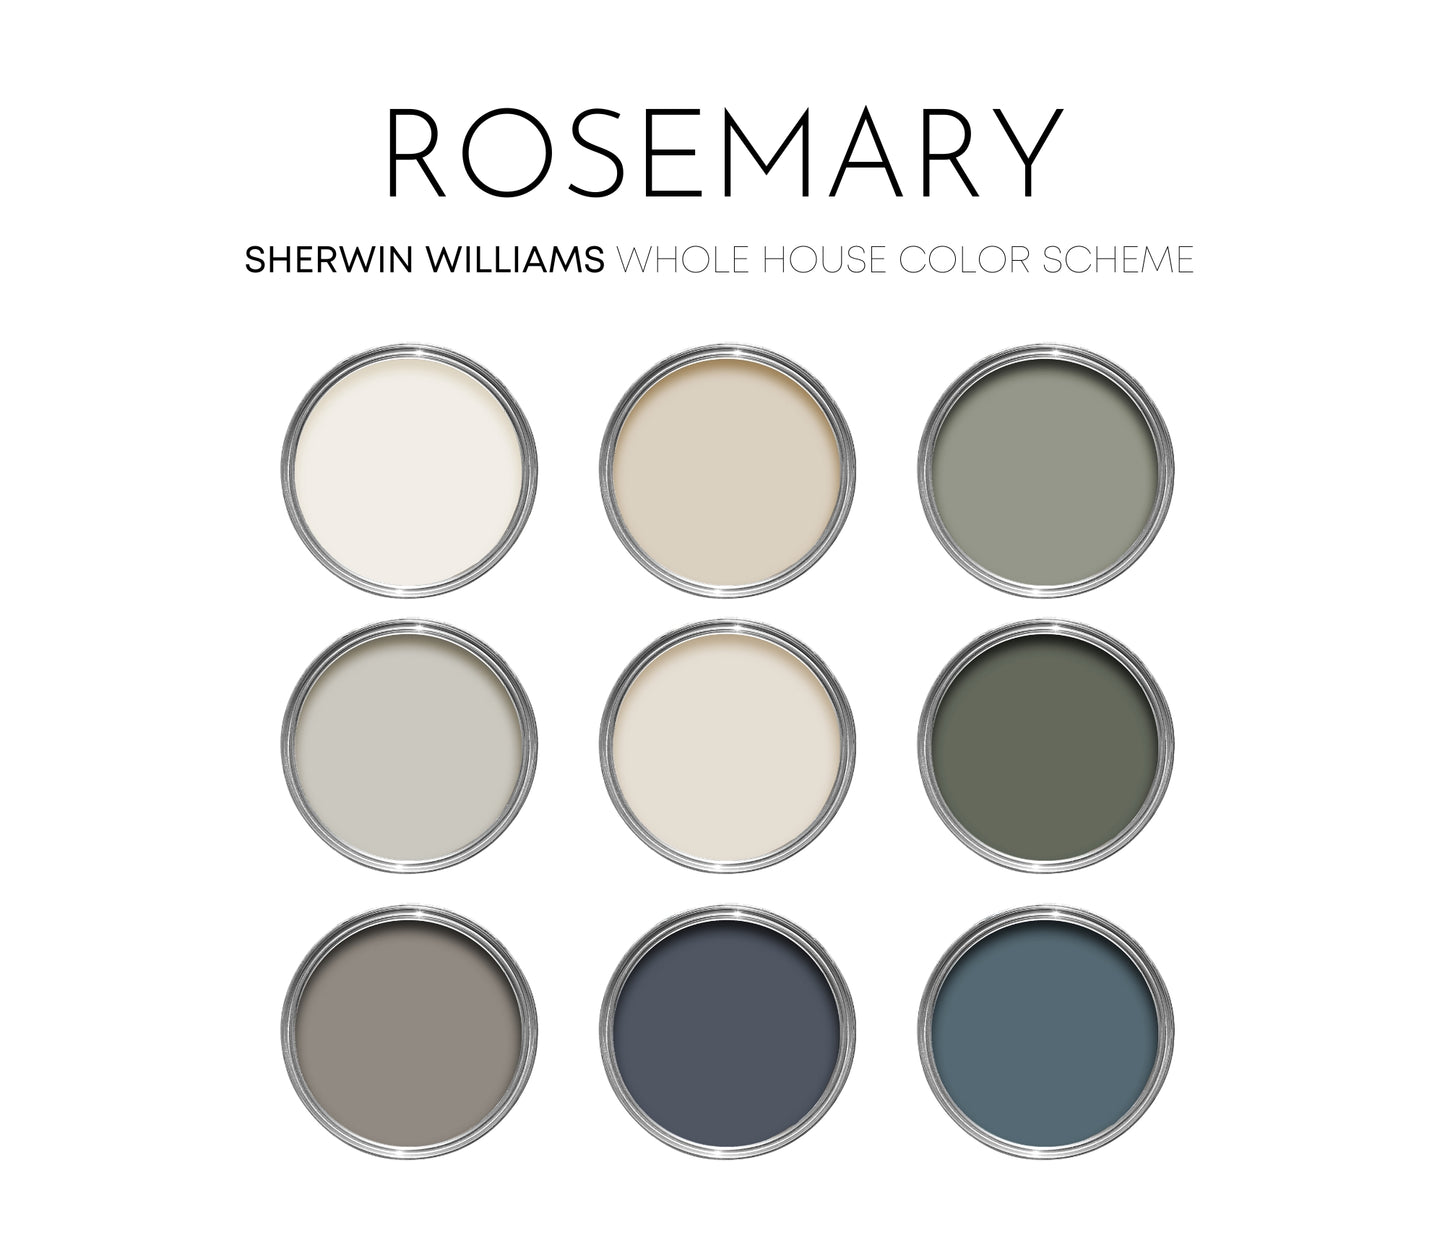 Rosemary Sherwin Williams Paint Palette, Modern Neutral Interior Paint Colors for Home, Rosemary Compliments, Warm Whites, Evergreen Fog